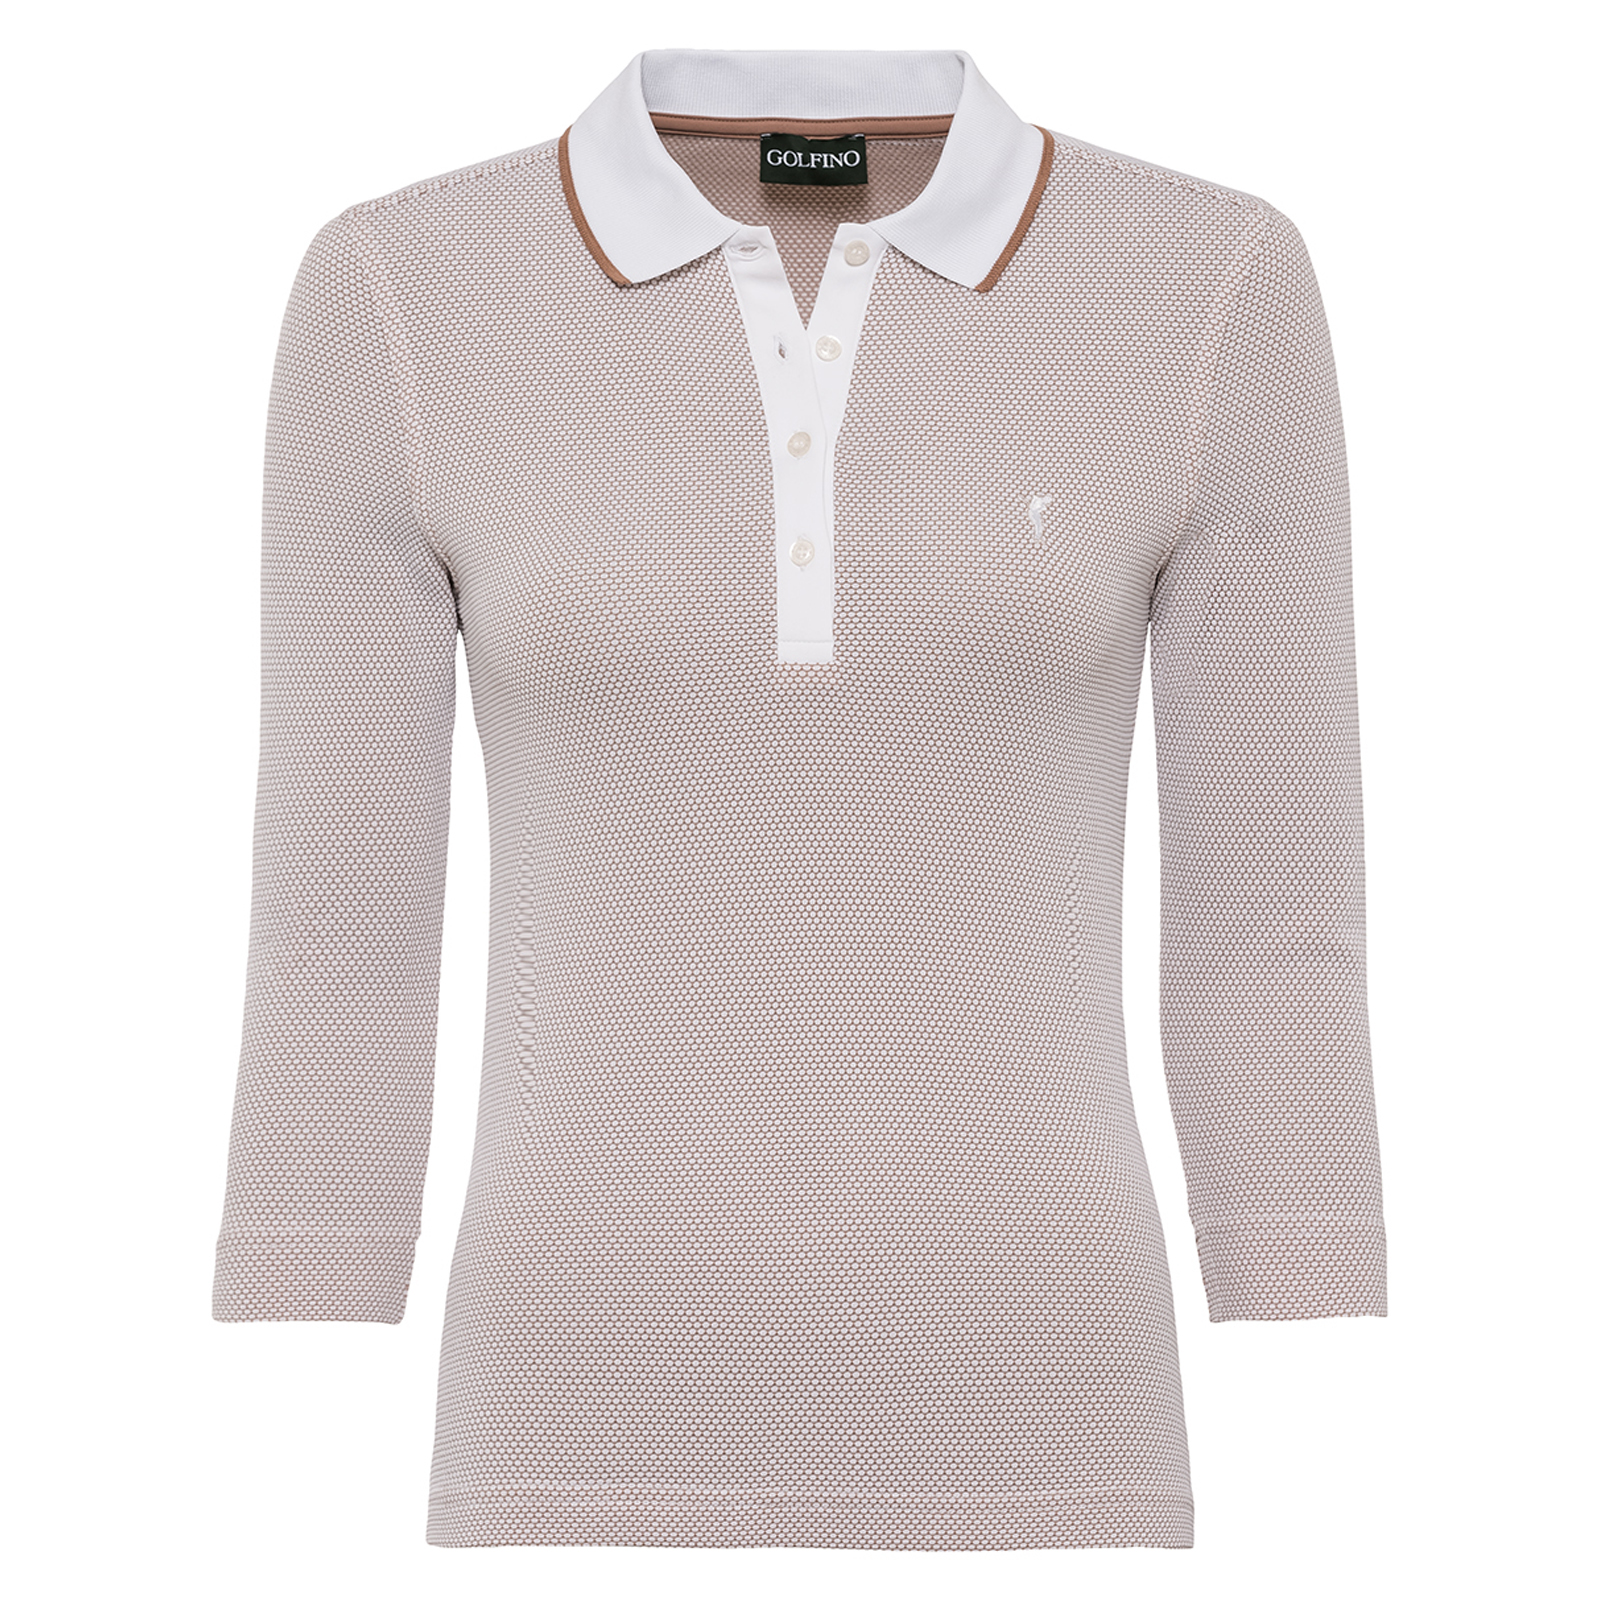 Ladies' golf polo shirt with 3/4-sleeves made from moisture-regulating bubble Jacquard fabric